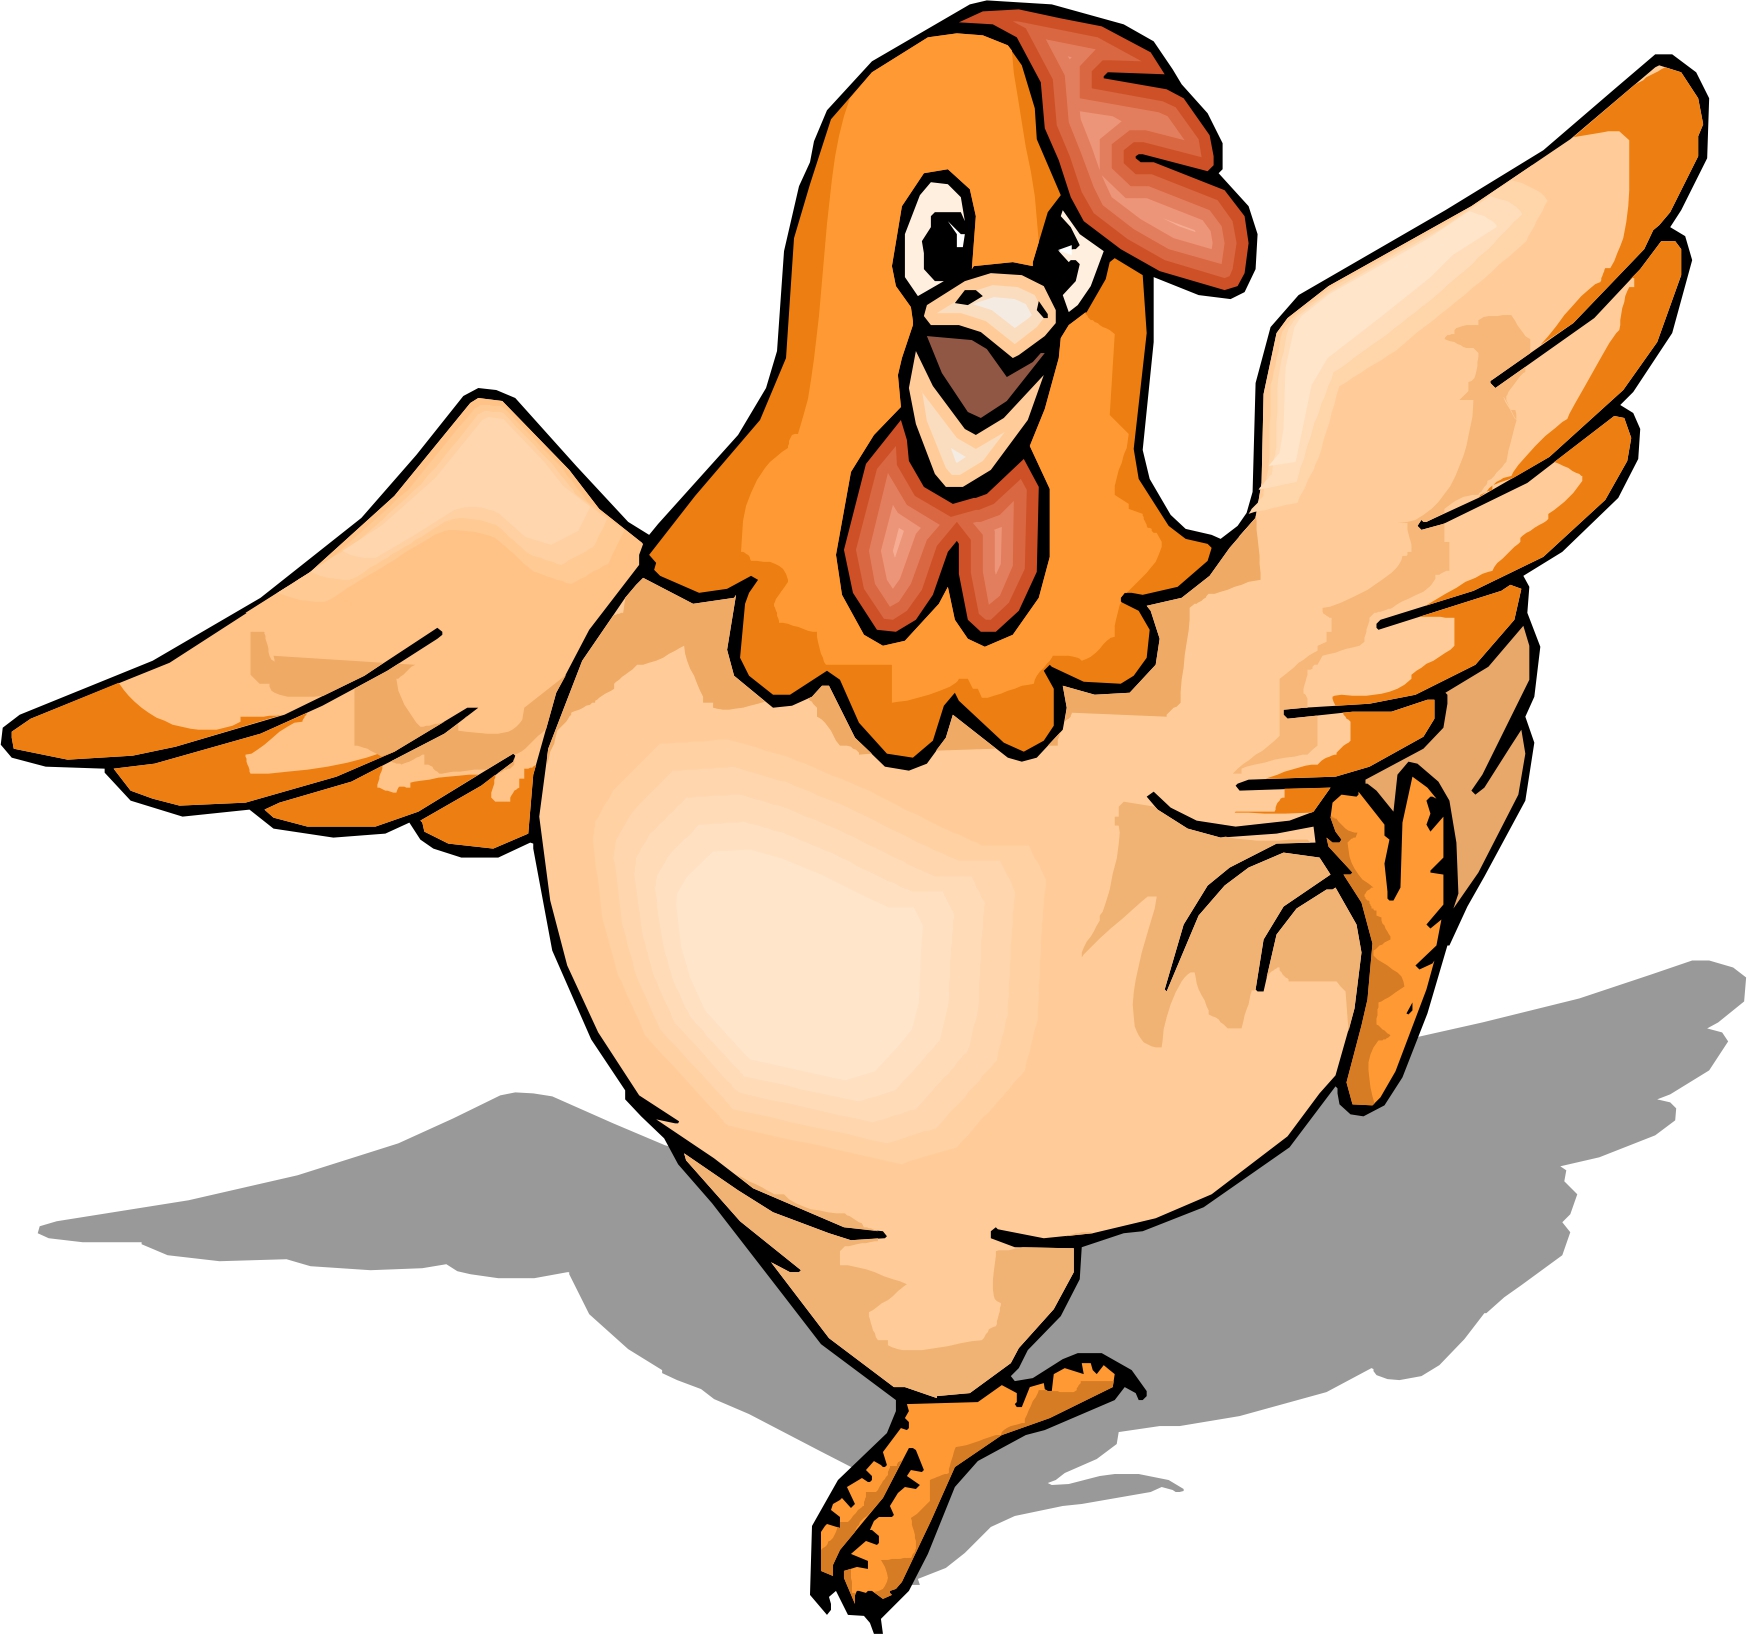 Cartoon Chickens Images - ClipArt Best